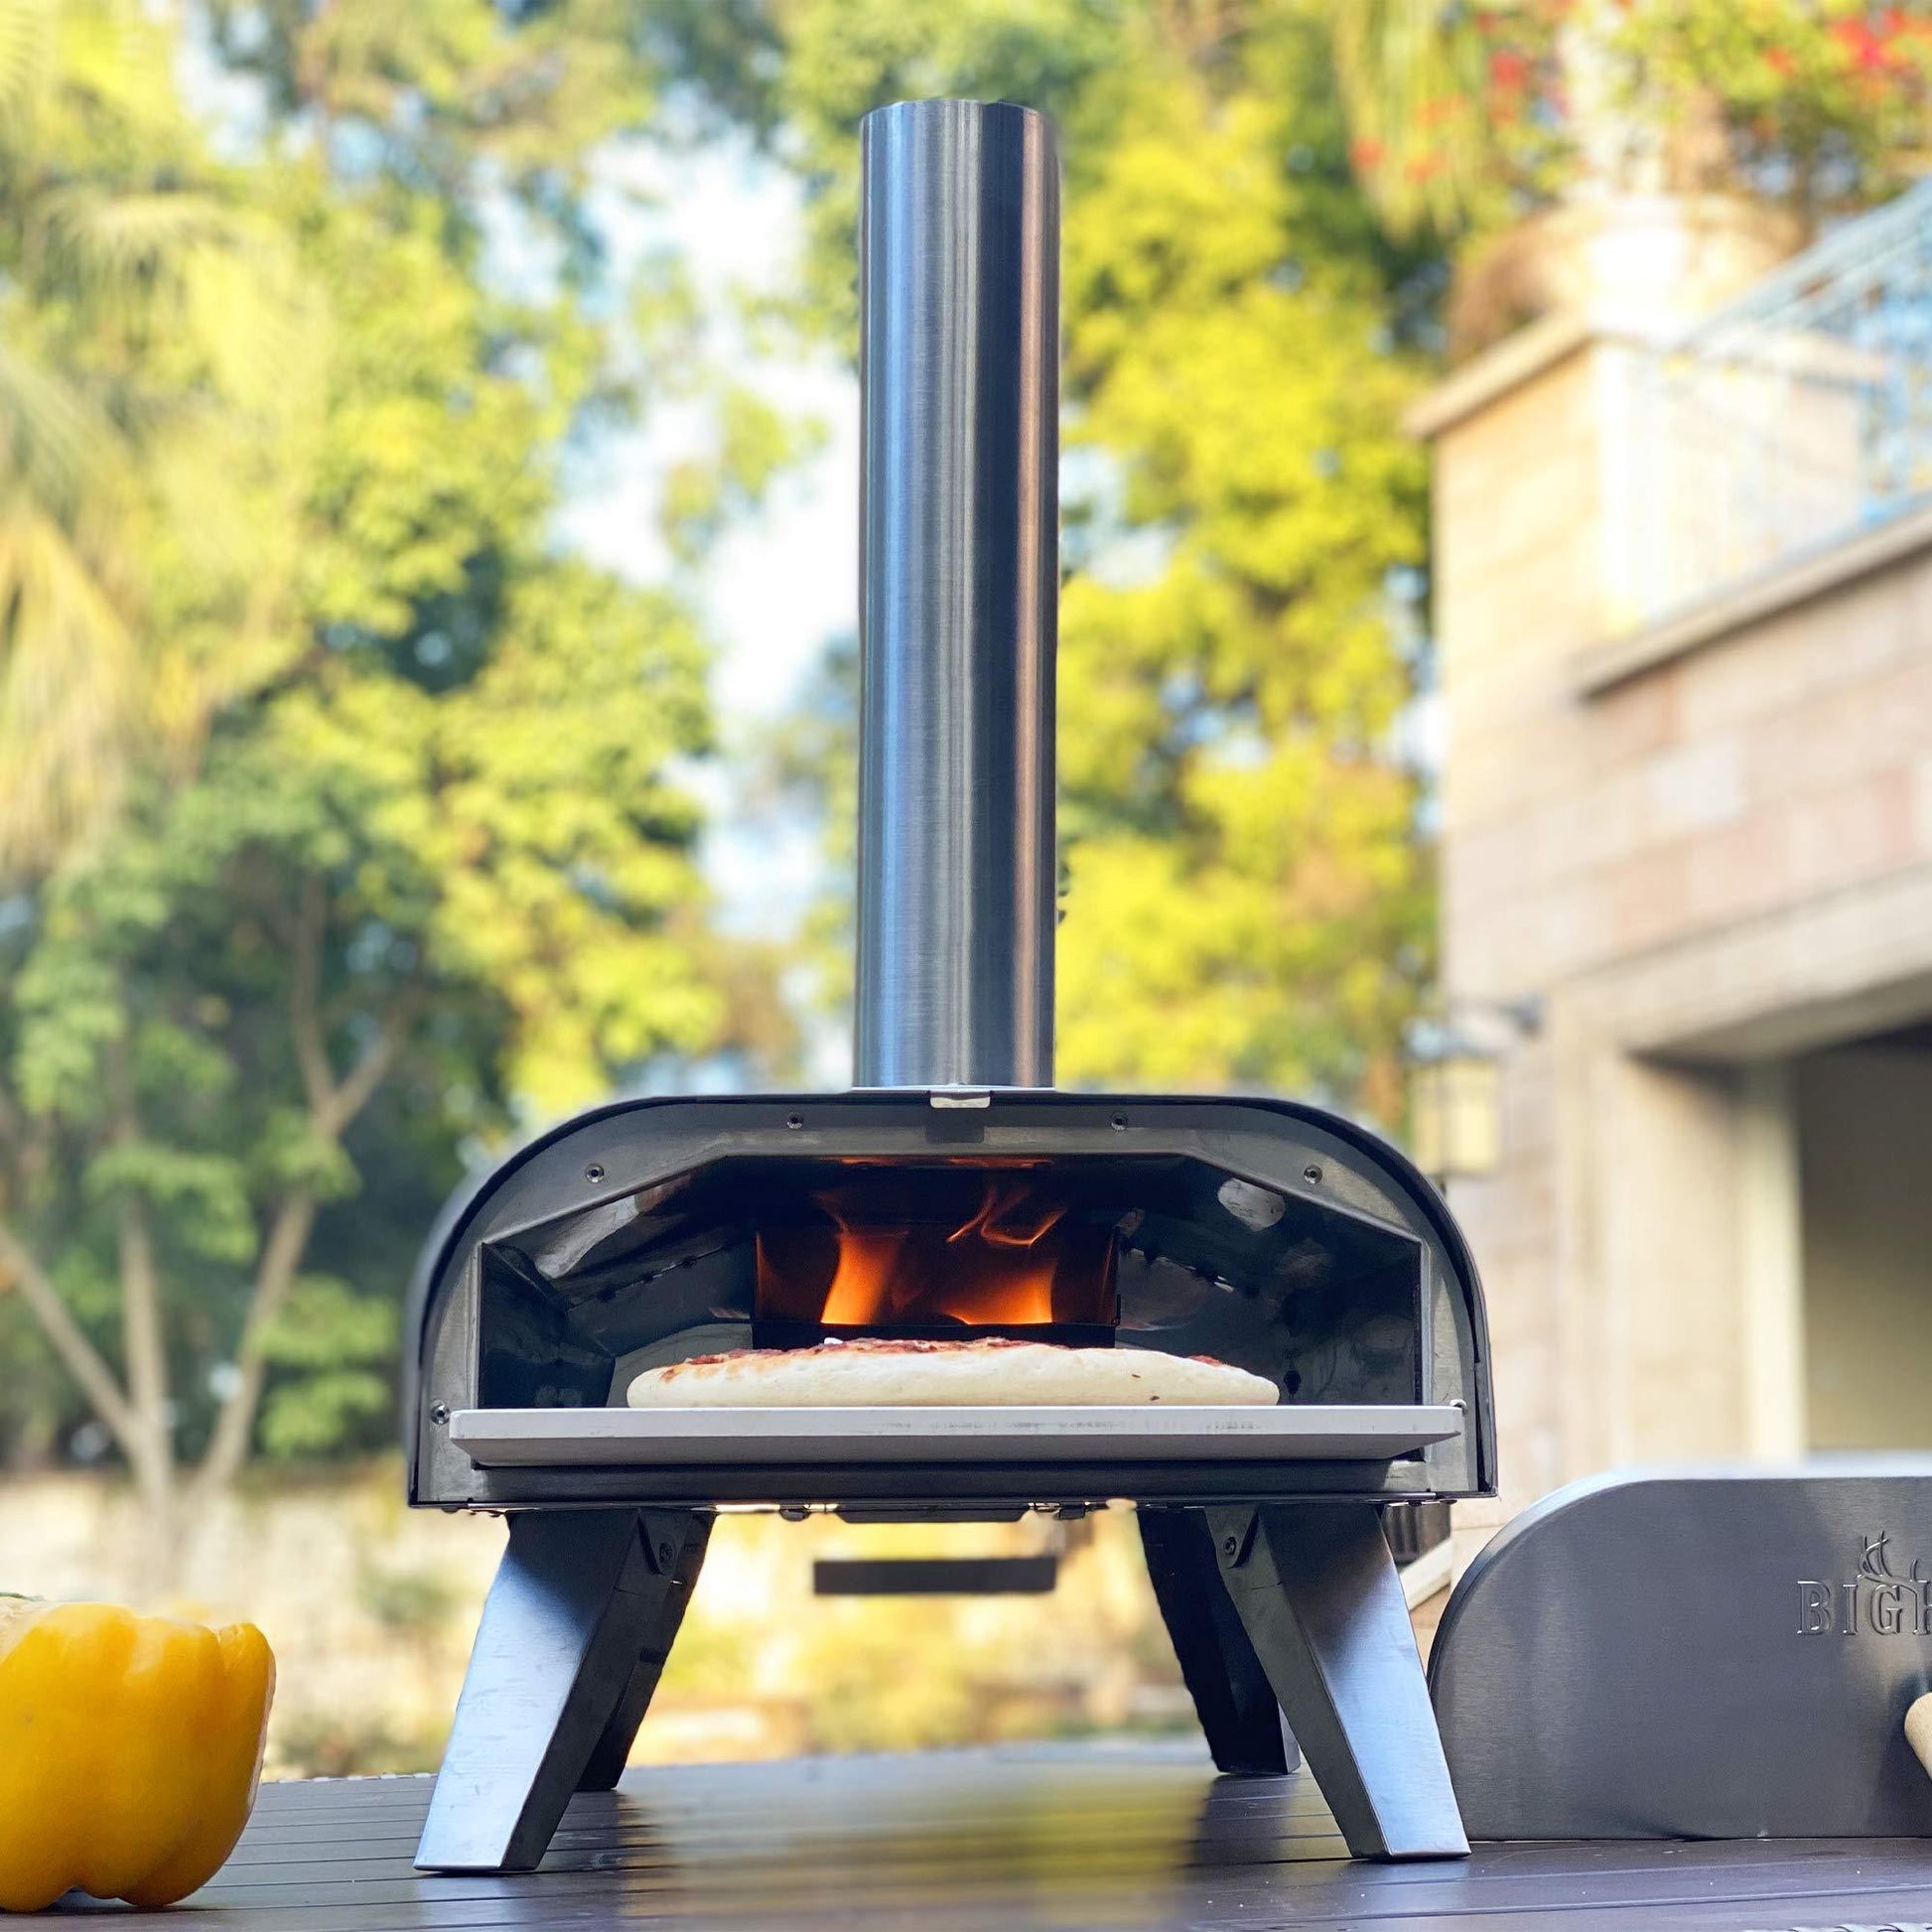 BIG HORN OUTDOORS Pizza Oven Outdoor Wood Pellet Burning, Portable Stainless Steel Pizza Maker for Garden, Outside, Backyard - CookCave